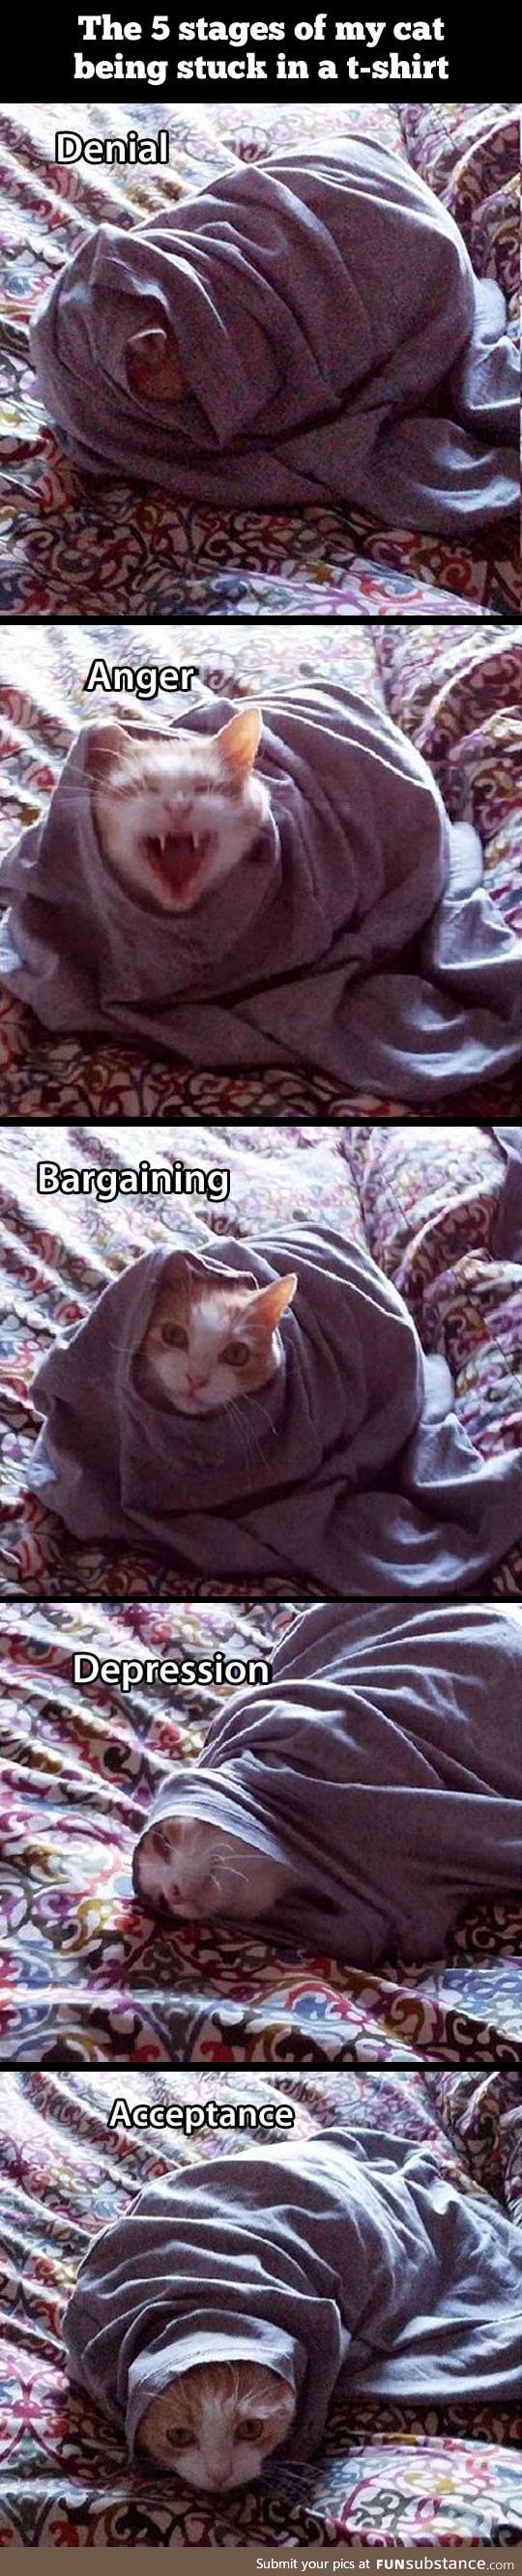 Five stages of a cat stuck in a t-shirt